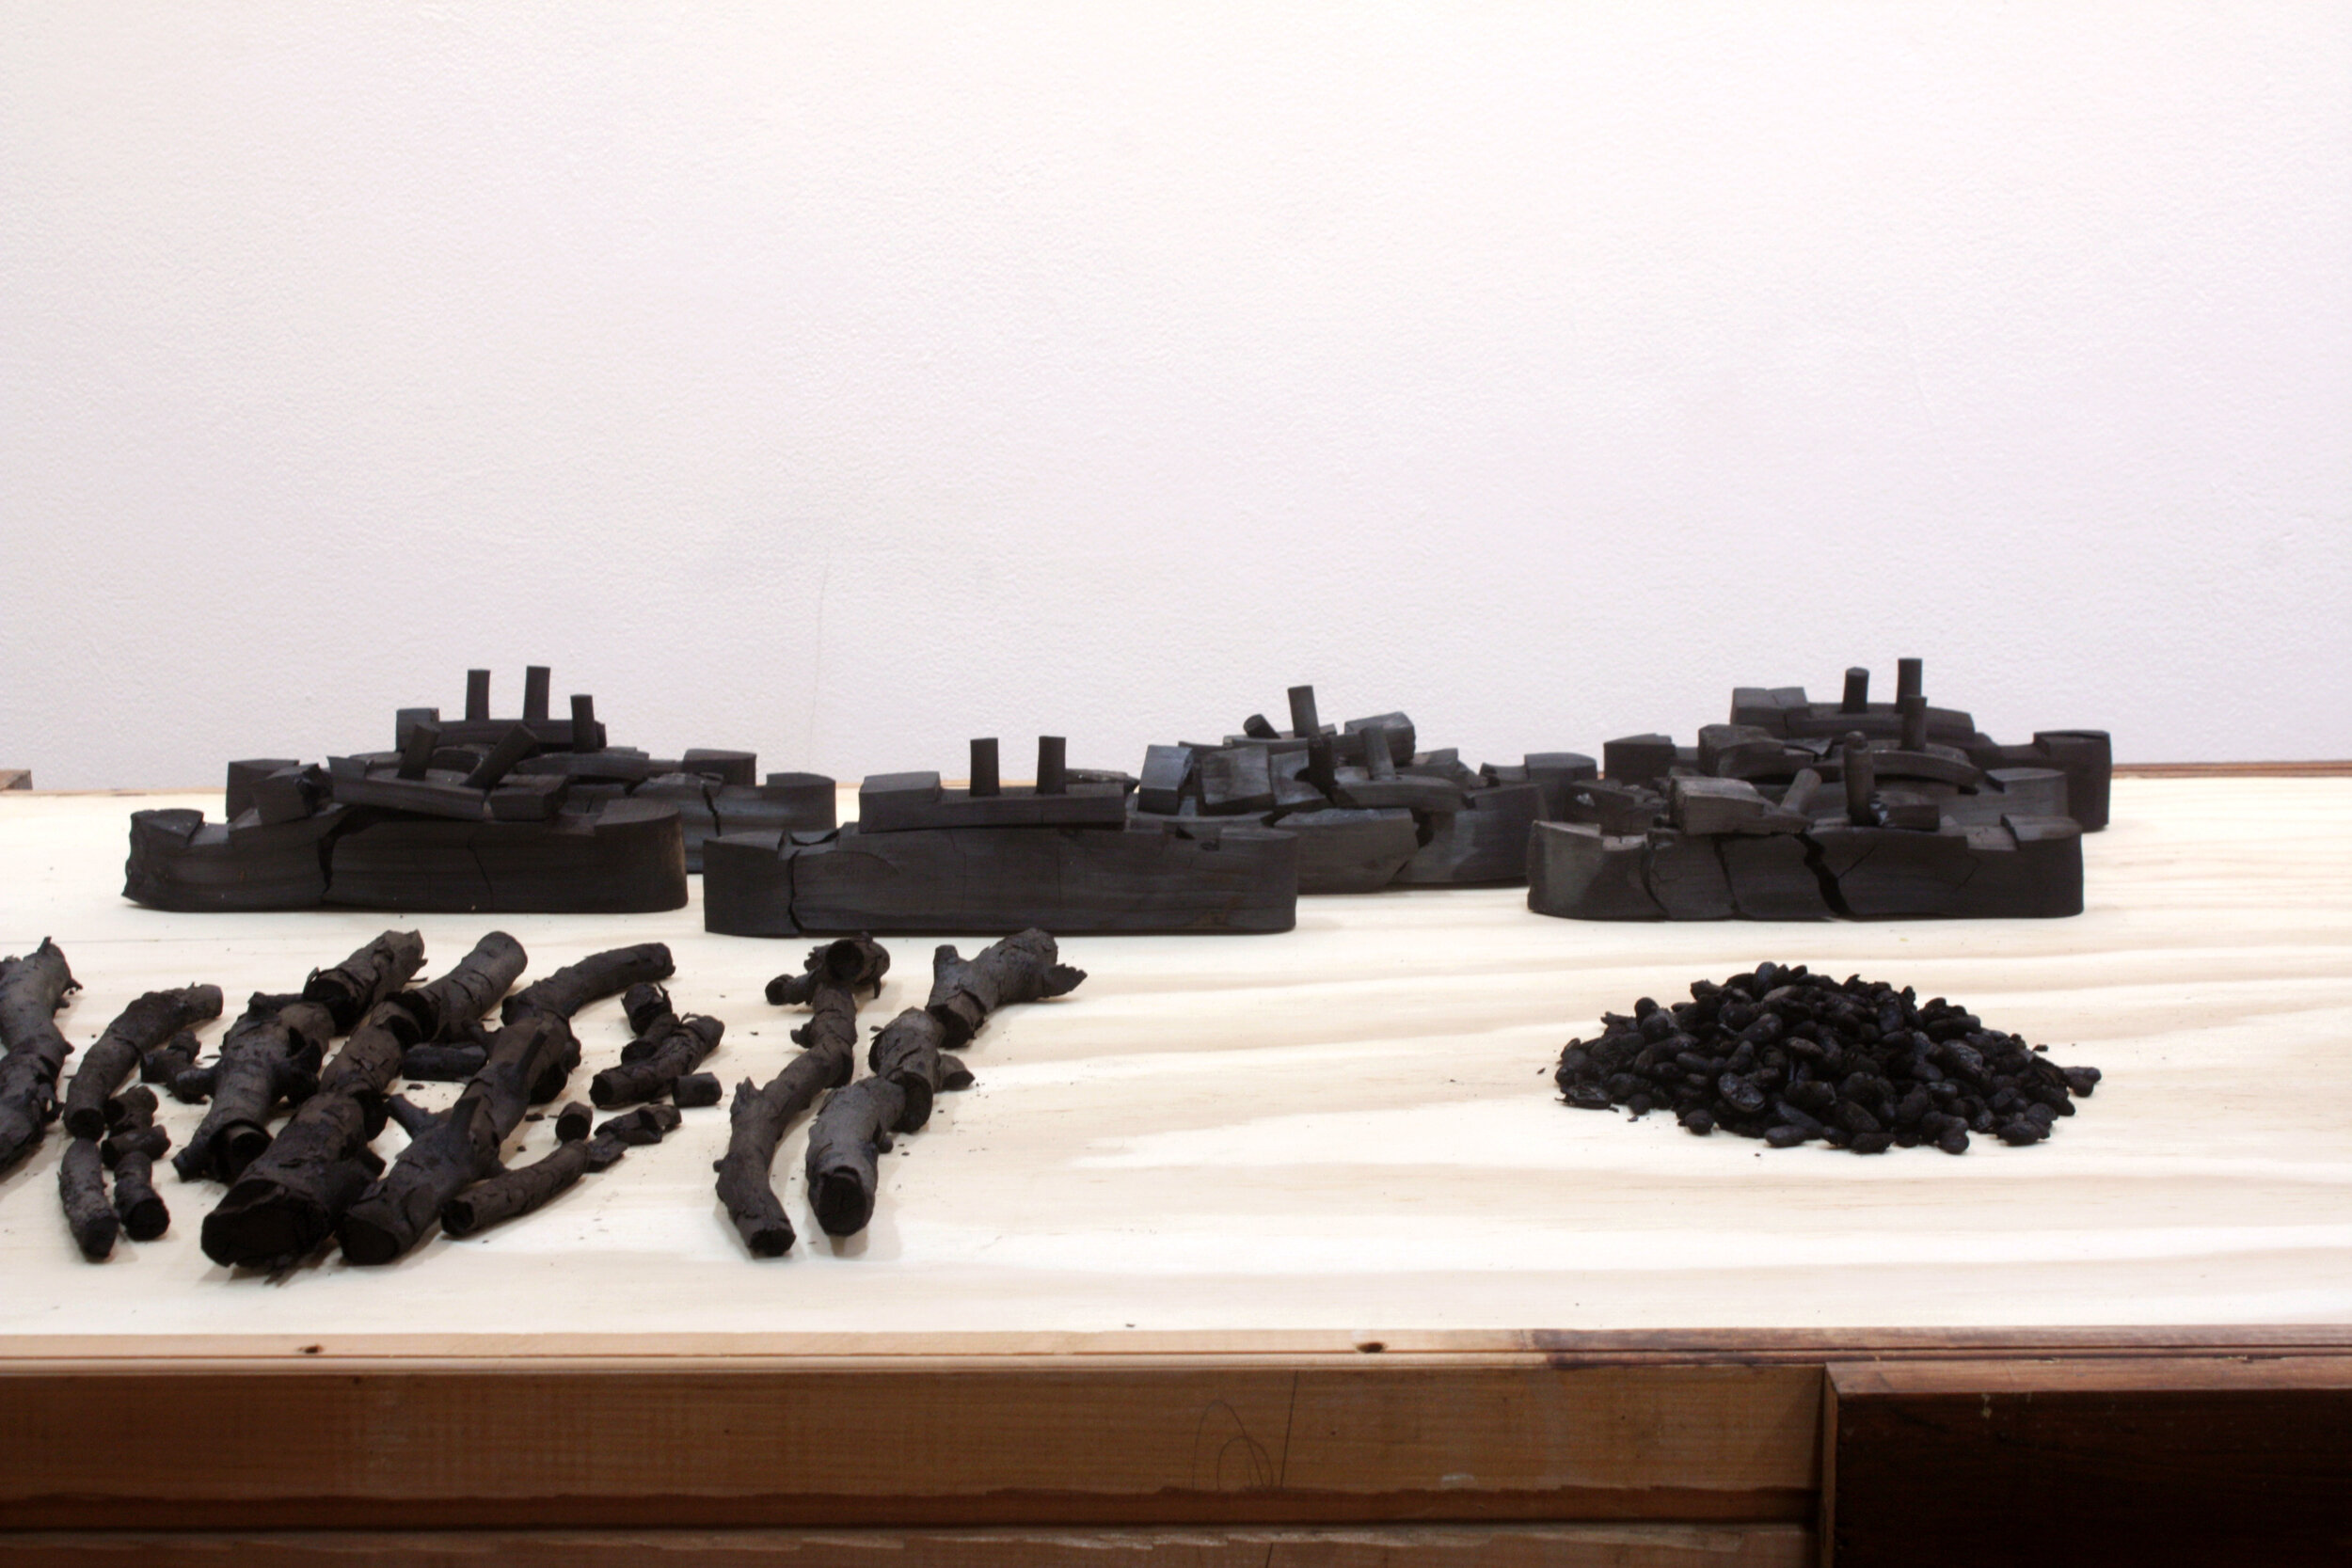    Carbon, atomic number 6   (detail) ,  2013  Material: carbonised objects and table of person/s unknown. 